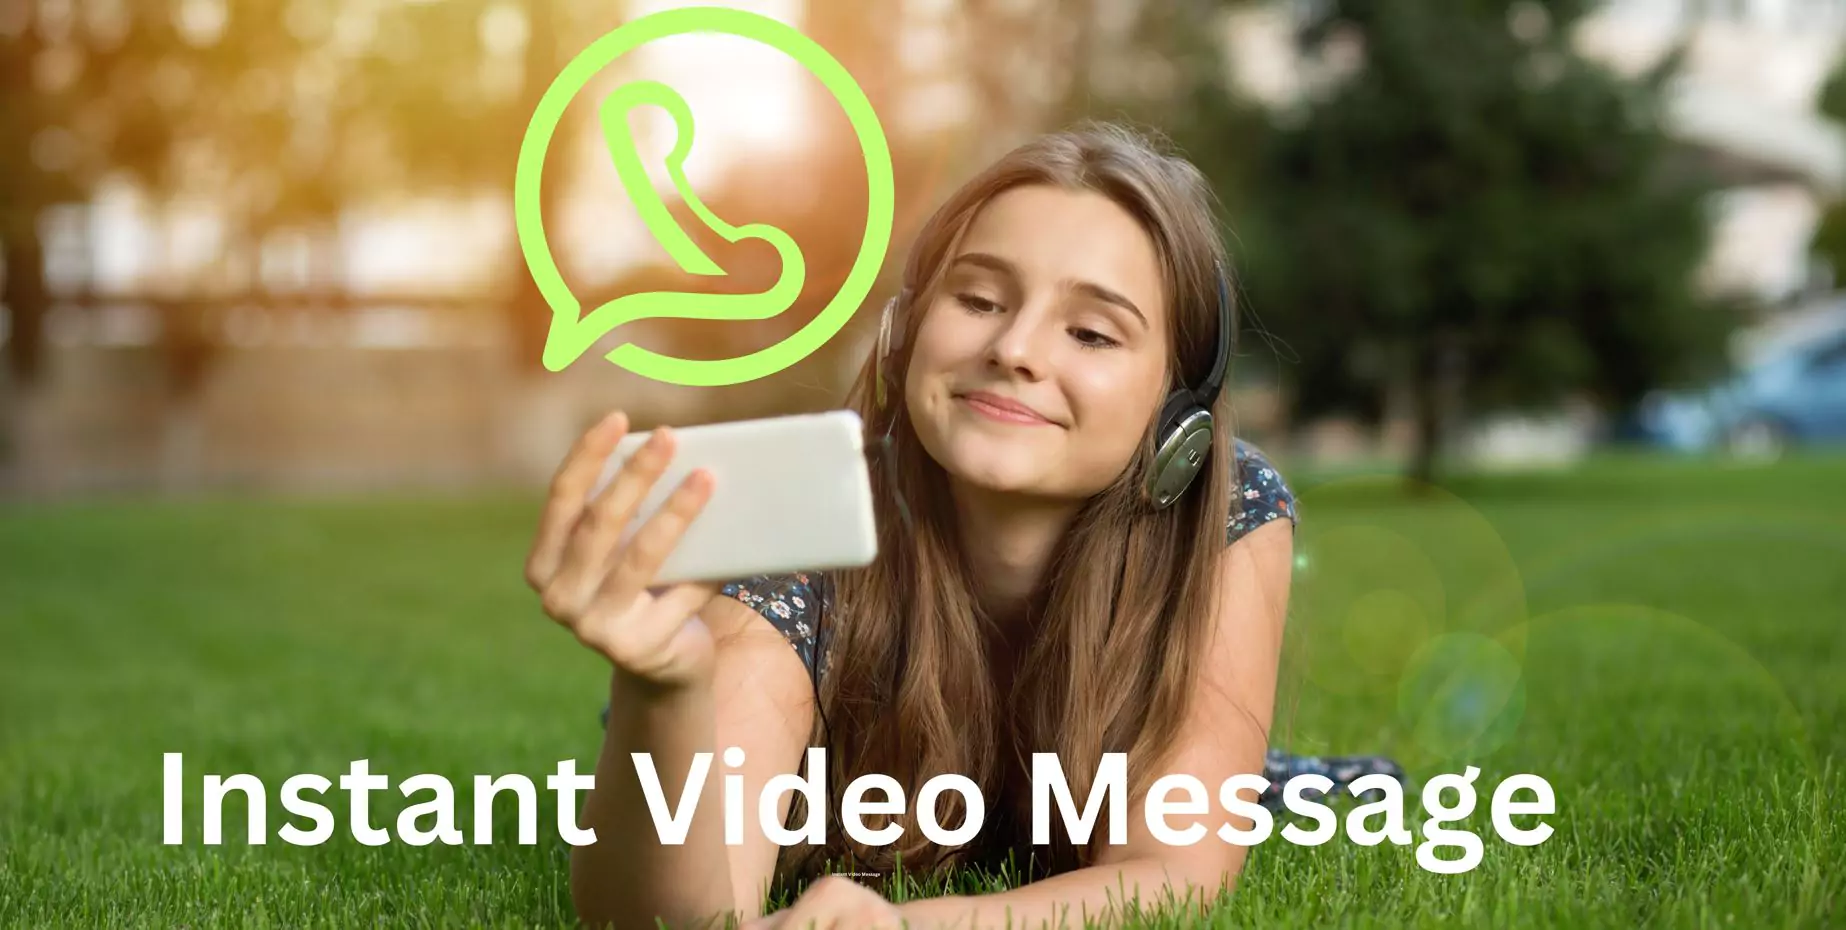 WhatsApp Introducing Instant Video Messages